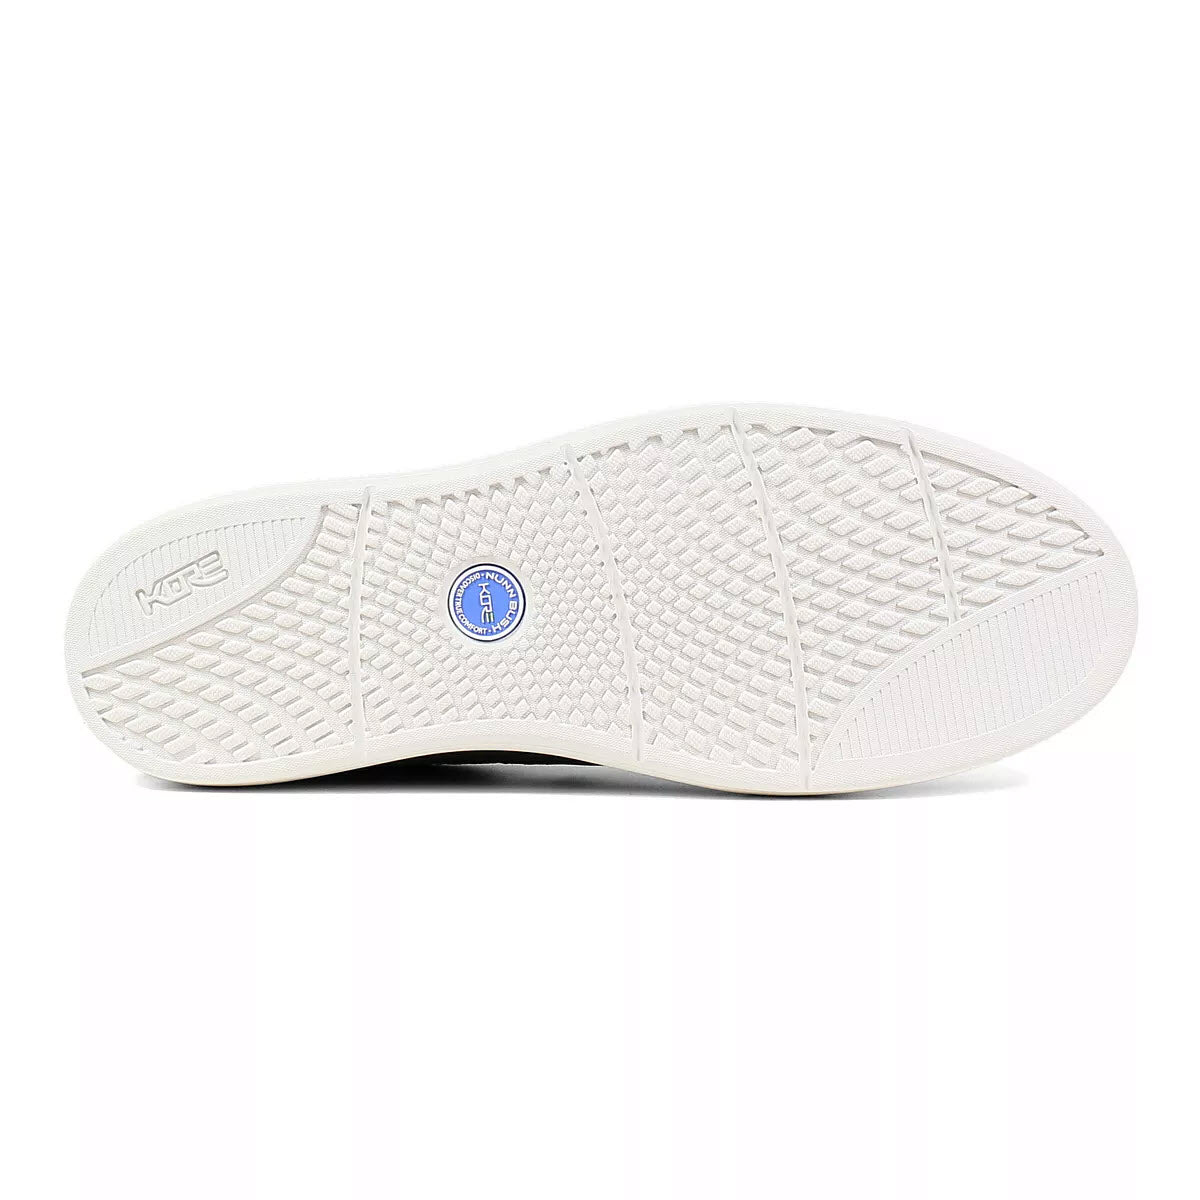 White Nunn Bush sneaker sole with textured pattern and blue brand logo, featuring a Memory Foam insole.